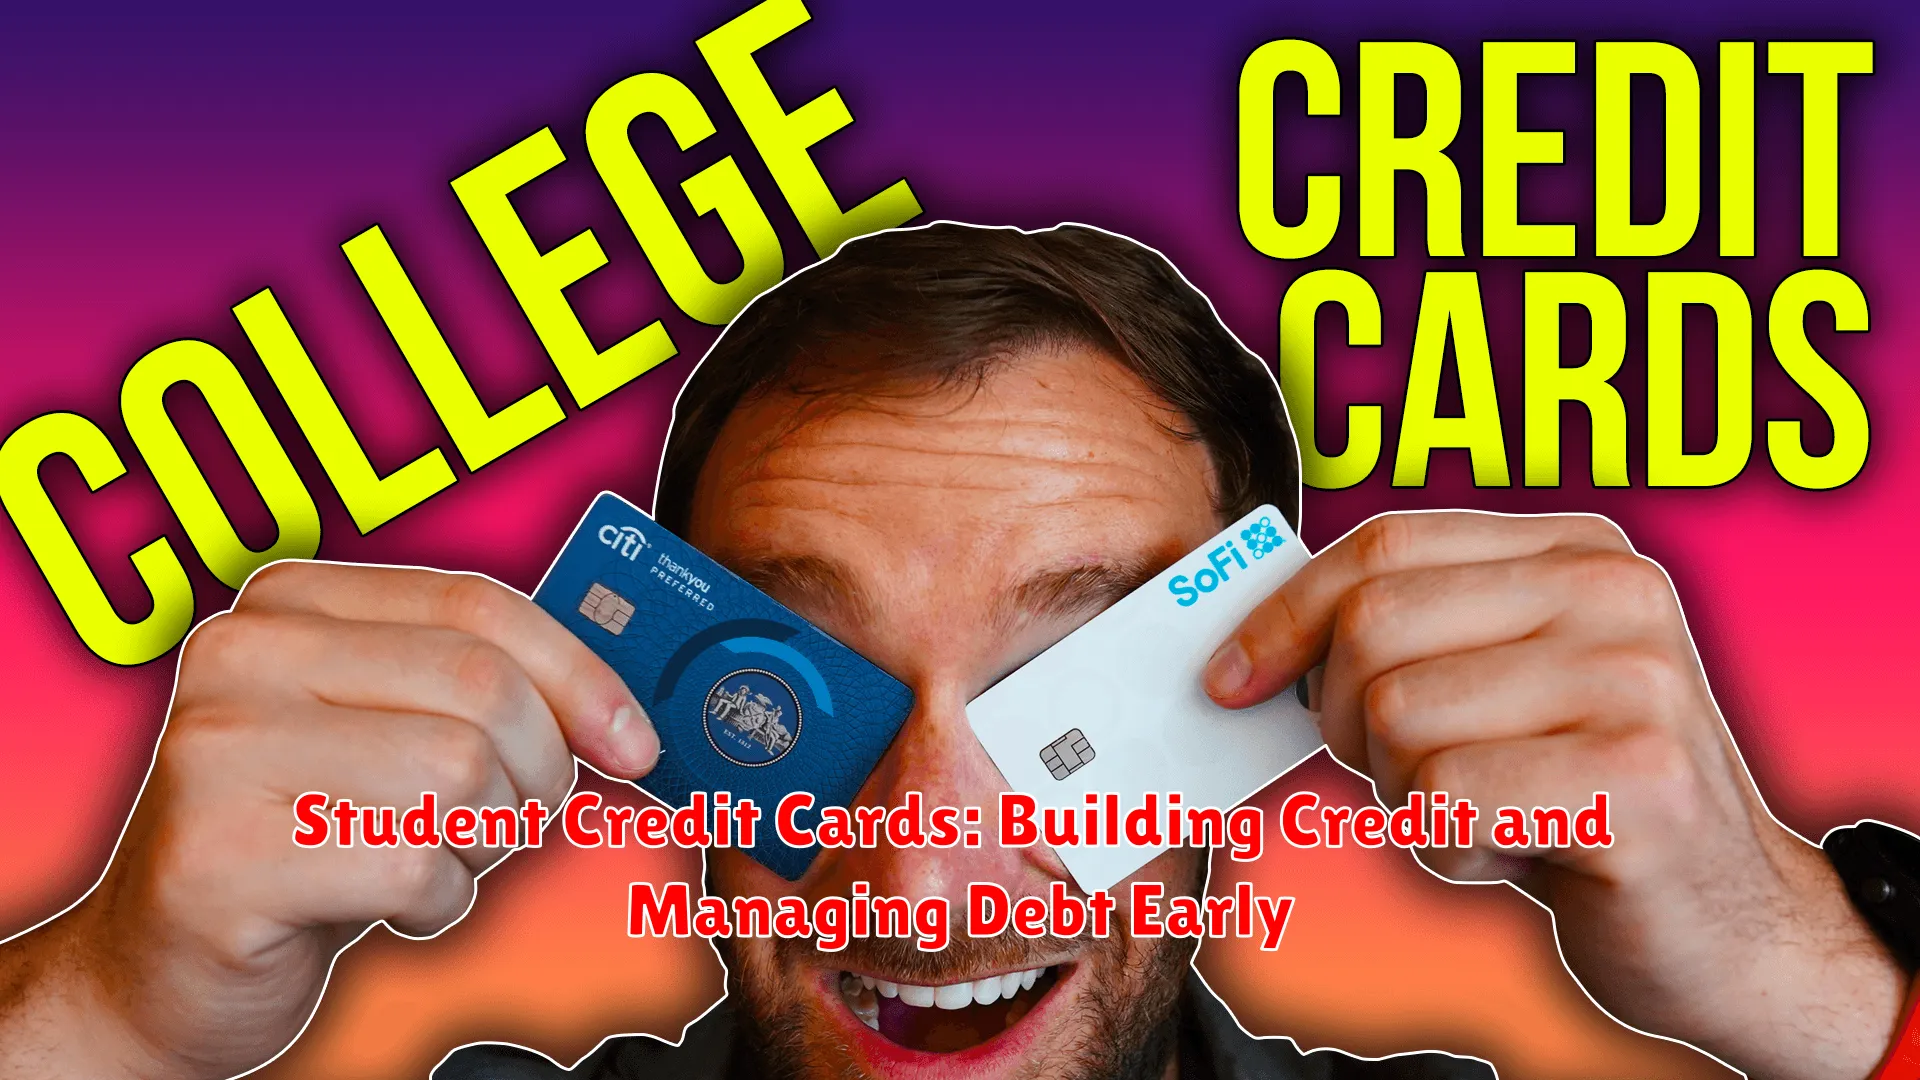 Student Credit Cards: Building Credit and Managing Debt Early